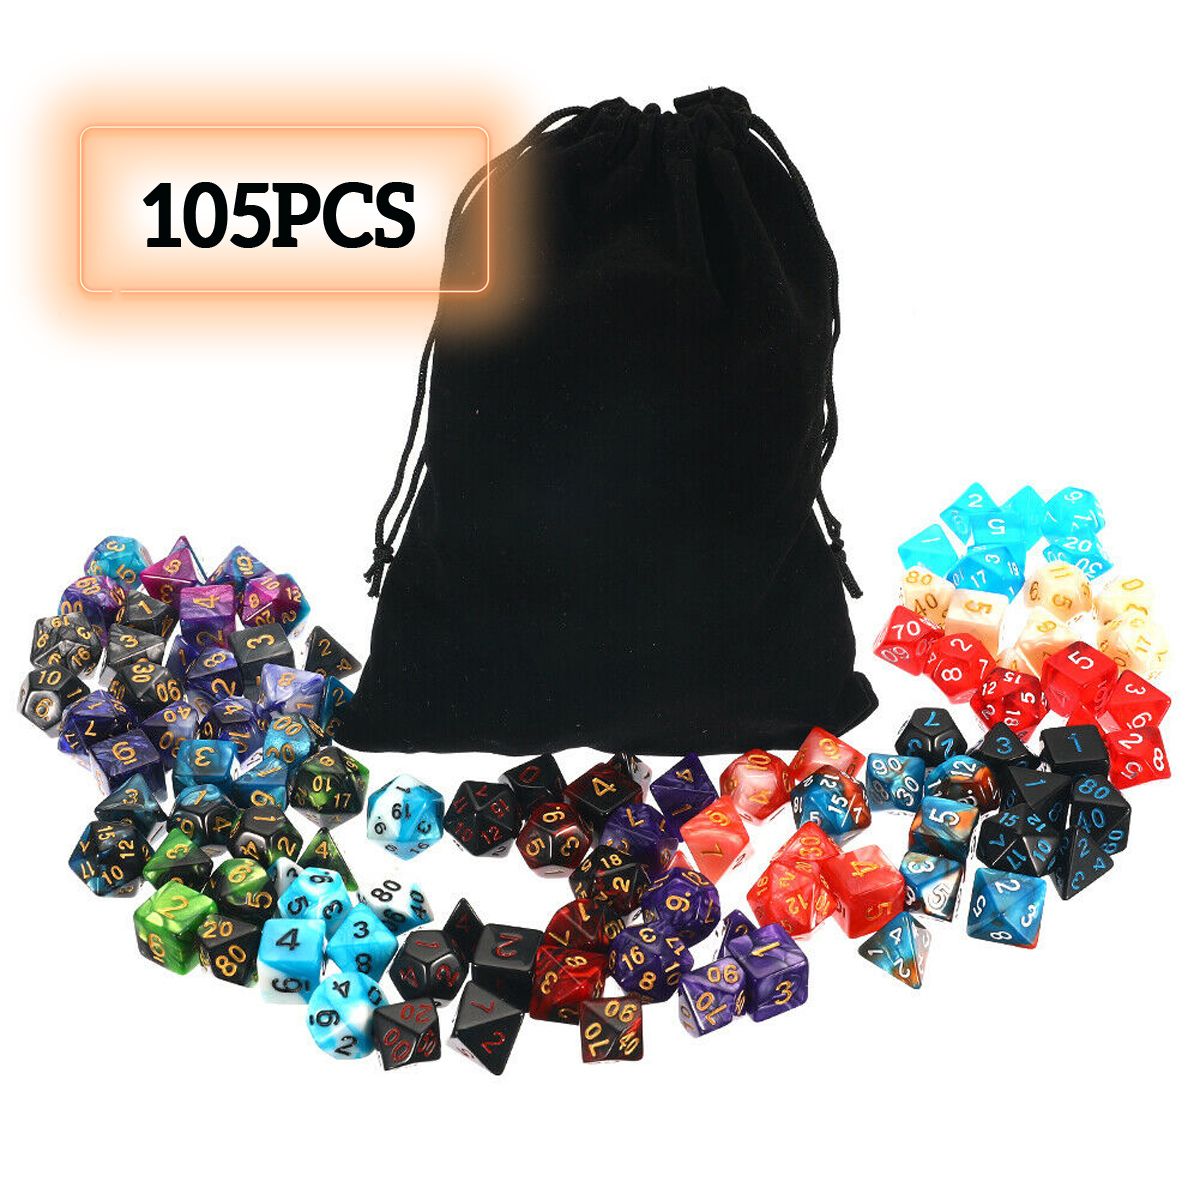 105-Pcs-Dice-Set-Polyhedral-Dices-7-Color-Role-Playing-Table-Game-With-Cloth-Game-Multi-sied-Dice-1574100